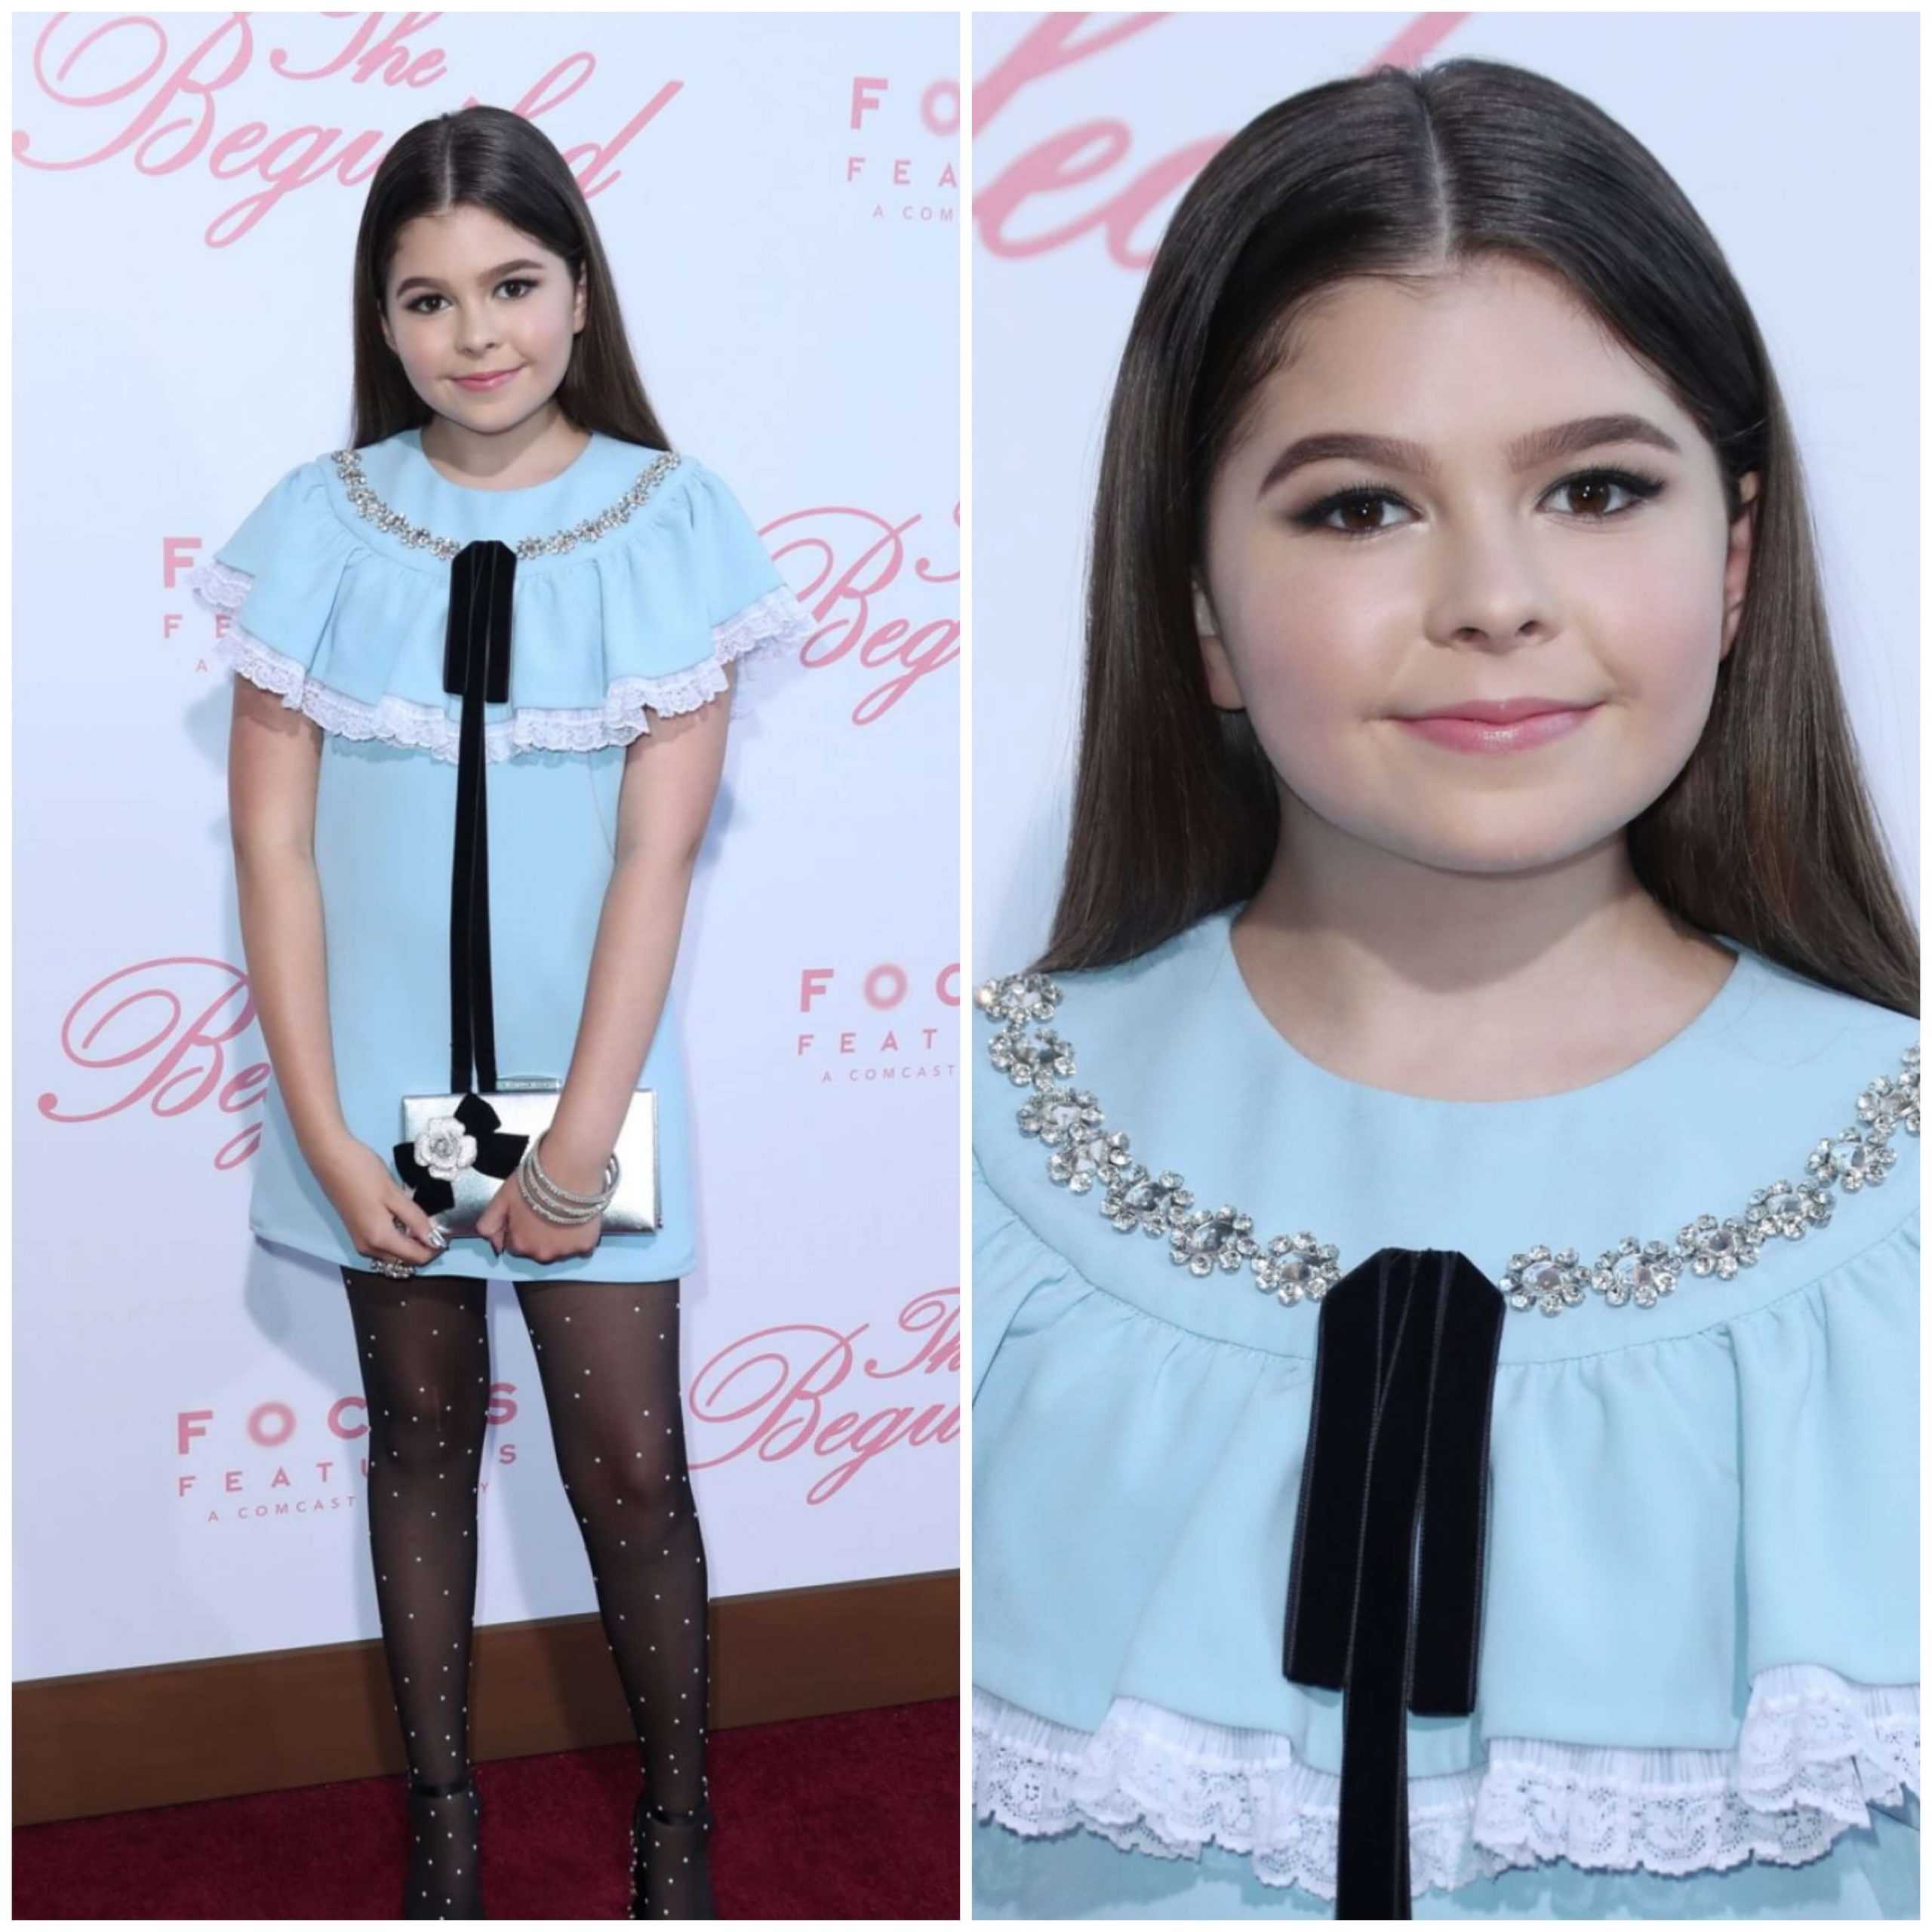 Addison Riecke's In Sky Blue Lace Dress With Dot Printed Tights At The Beguiled” Movie Premiere